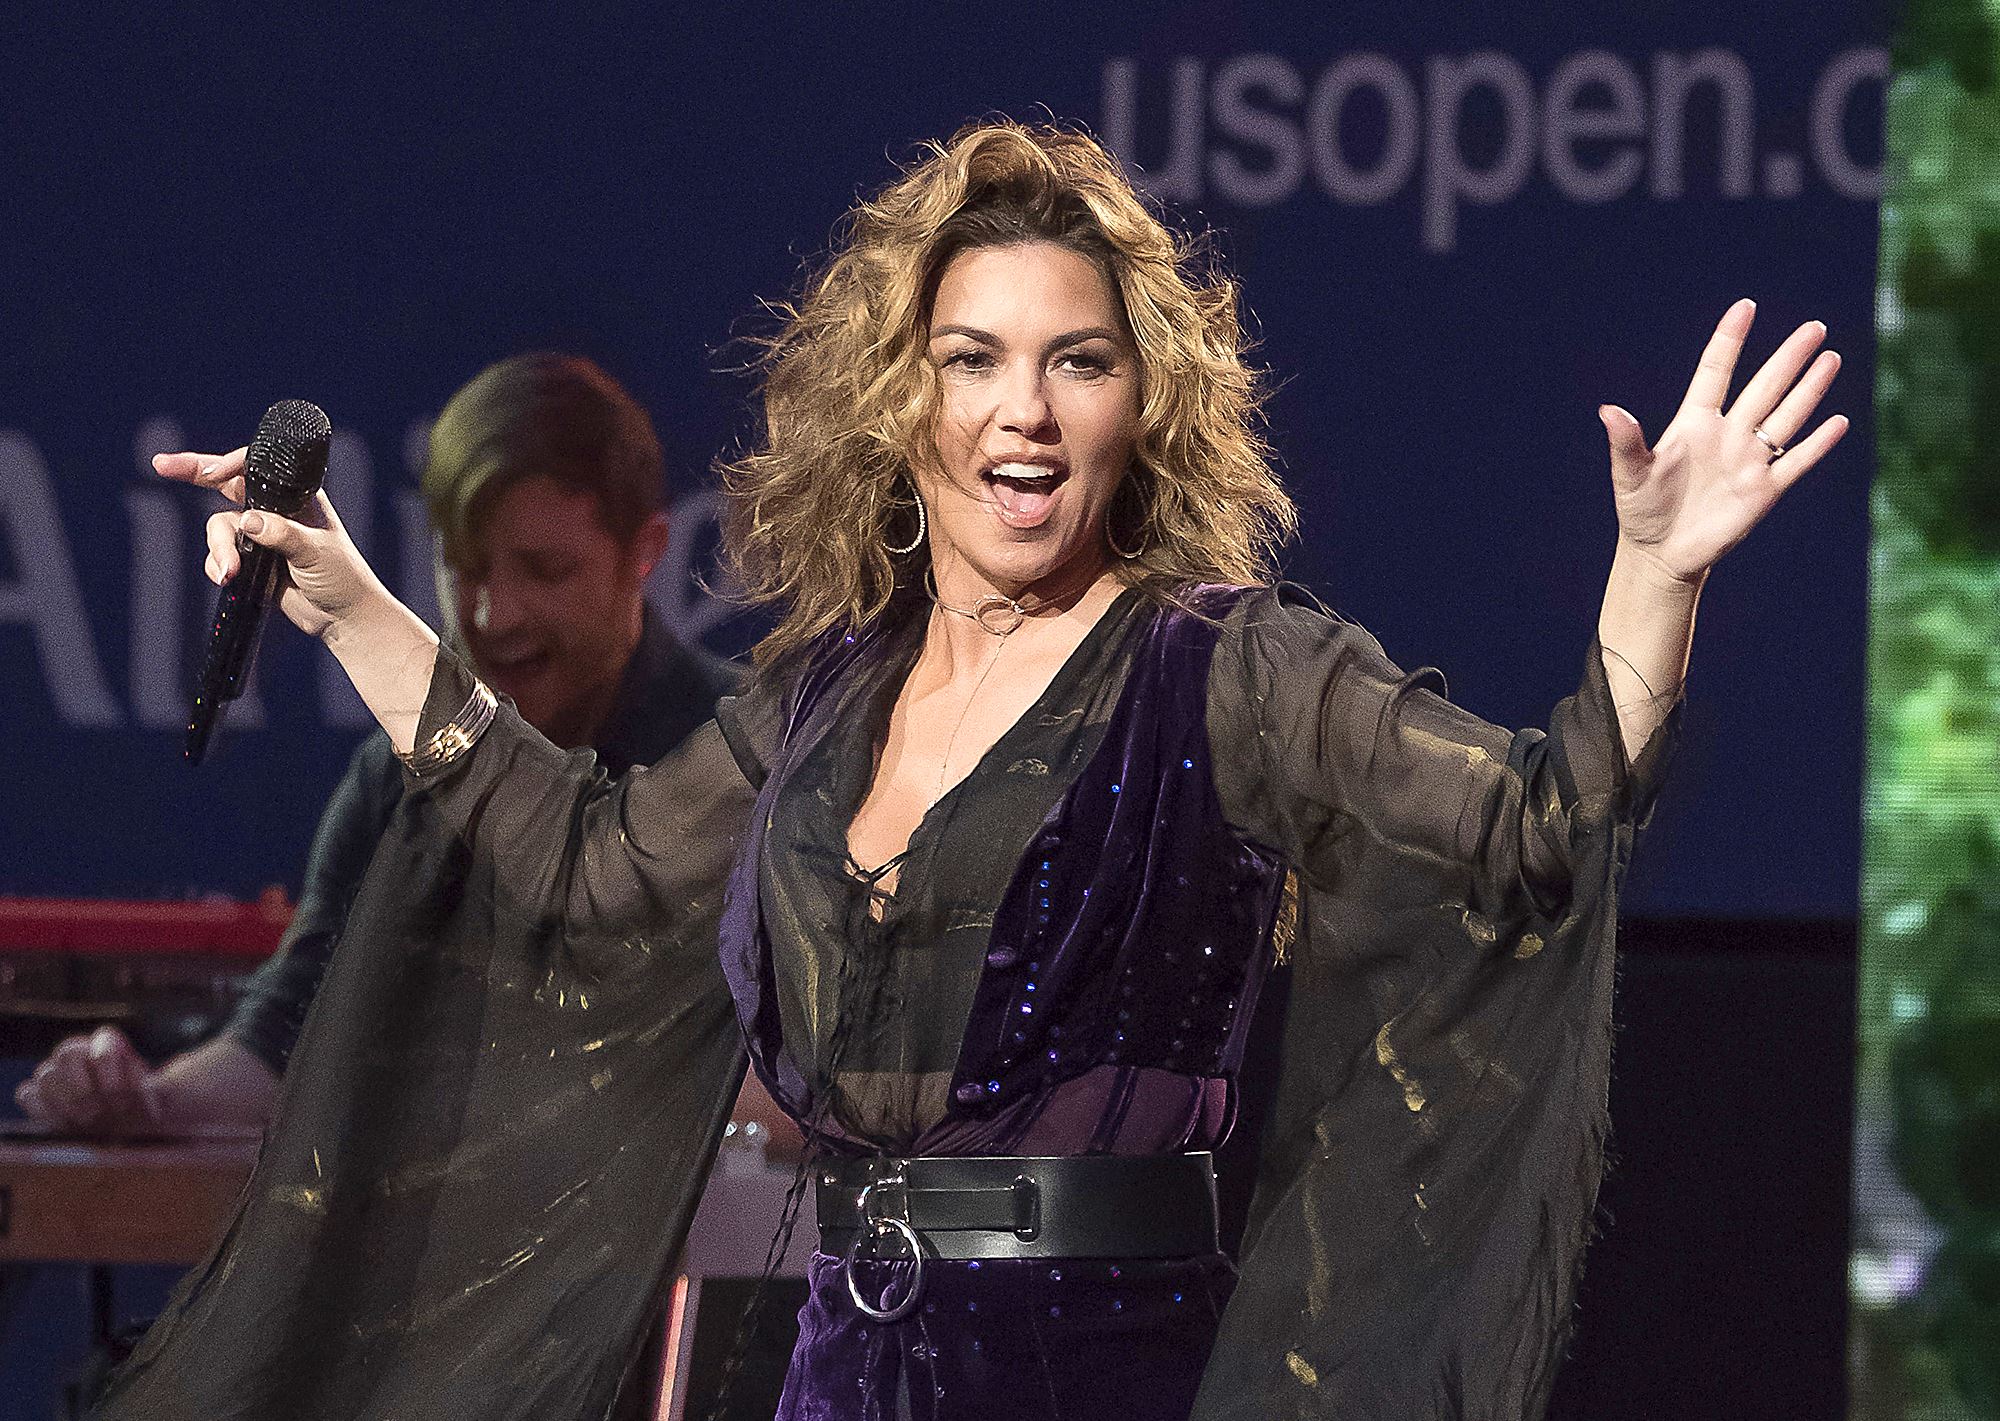 Shania back with own brand of country pop - The Blade